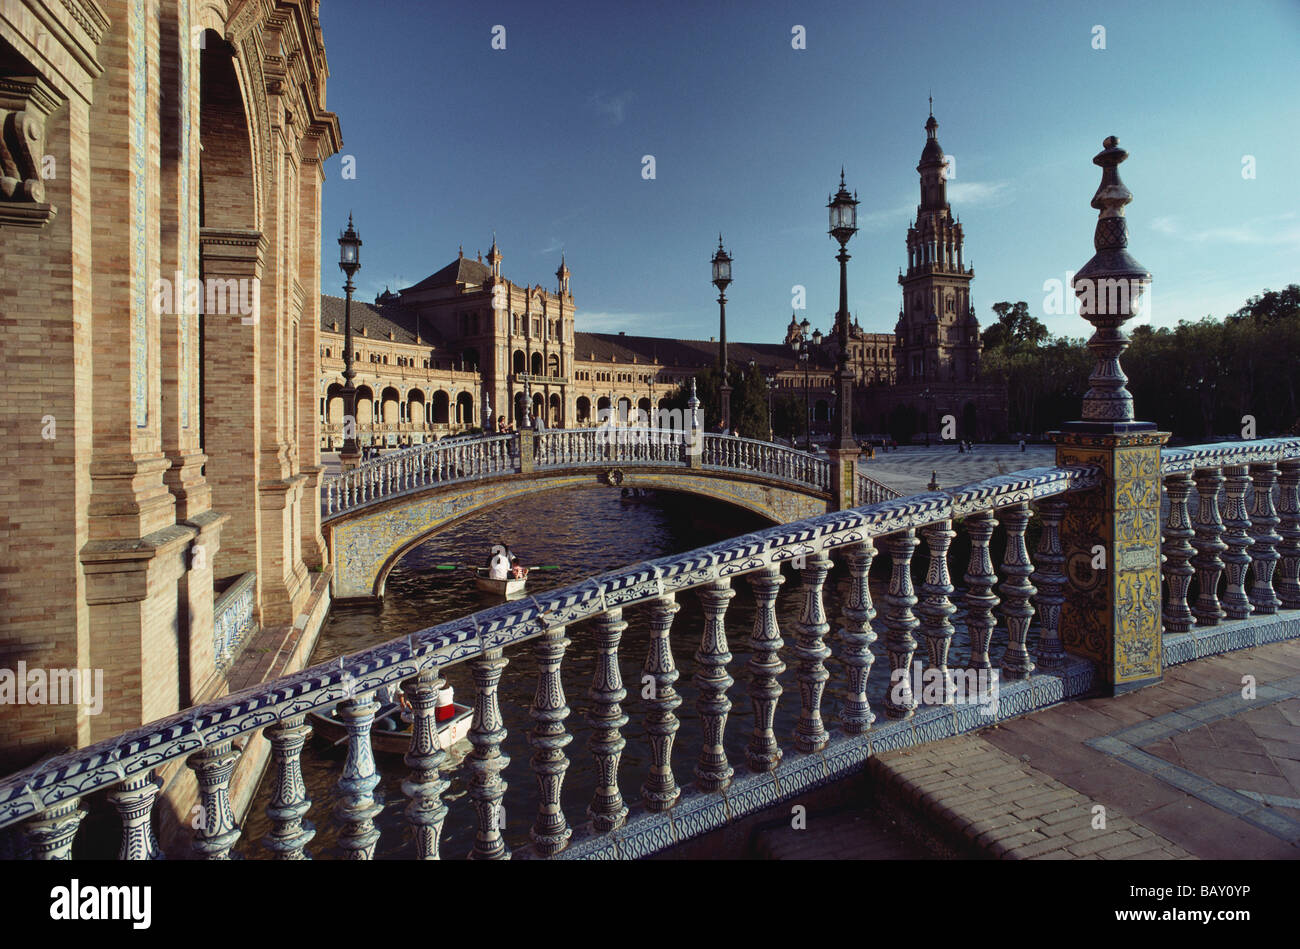 Delicate bridges with ceramic balustrades over canal with rowing boats at the Palacio Central, Seville, Andalusia, Spain Stock Photo